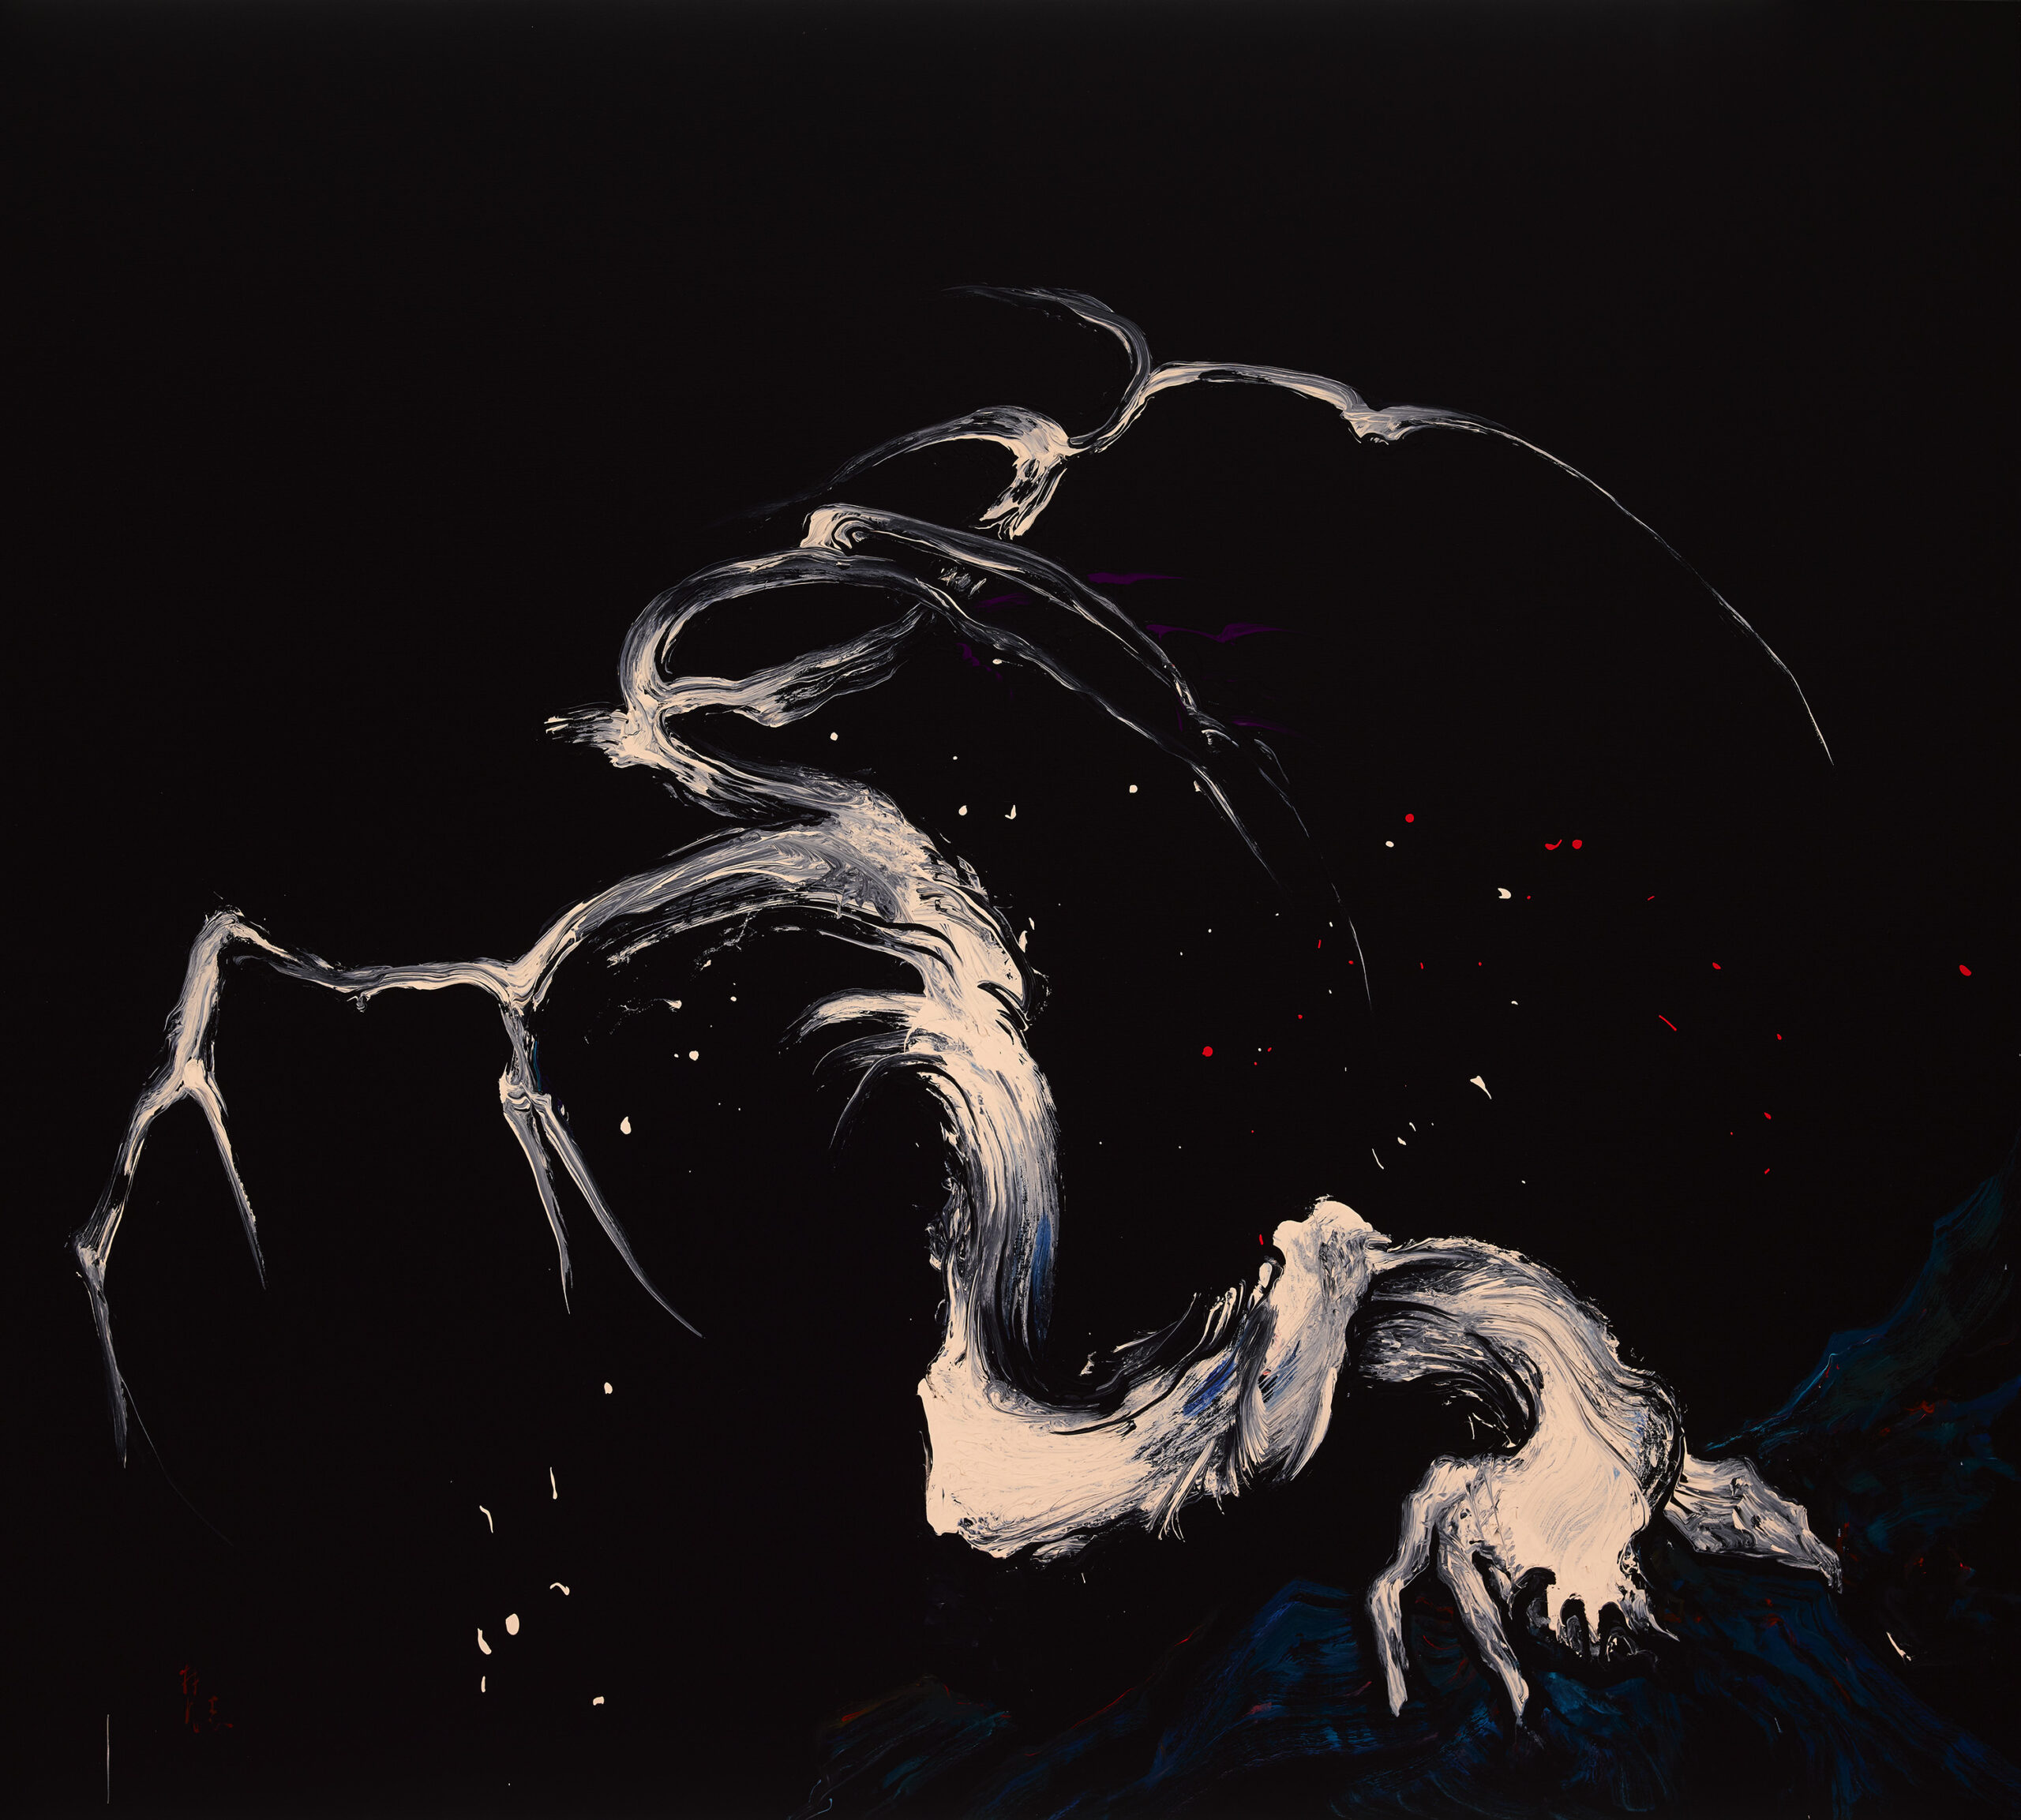 Zeng Fanzhi
Untitled, 2021
Oil on canvas
70 7/8 x 78 3/4 inches 
180 x 200 cm
© 2023 Zeng Fanzhi
Courtesy the artist and Gagosian